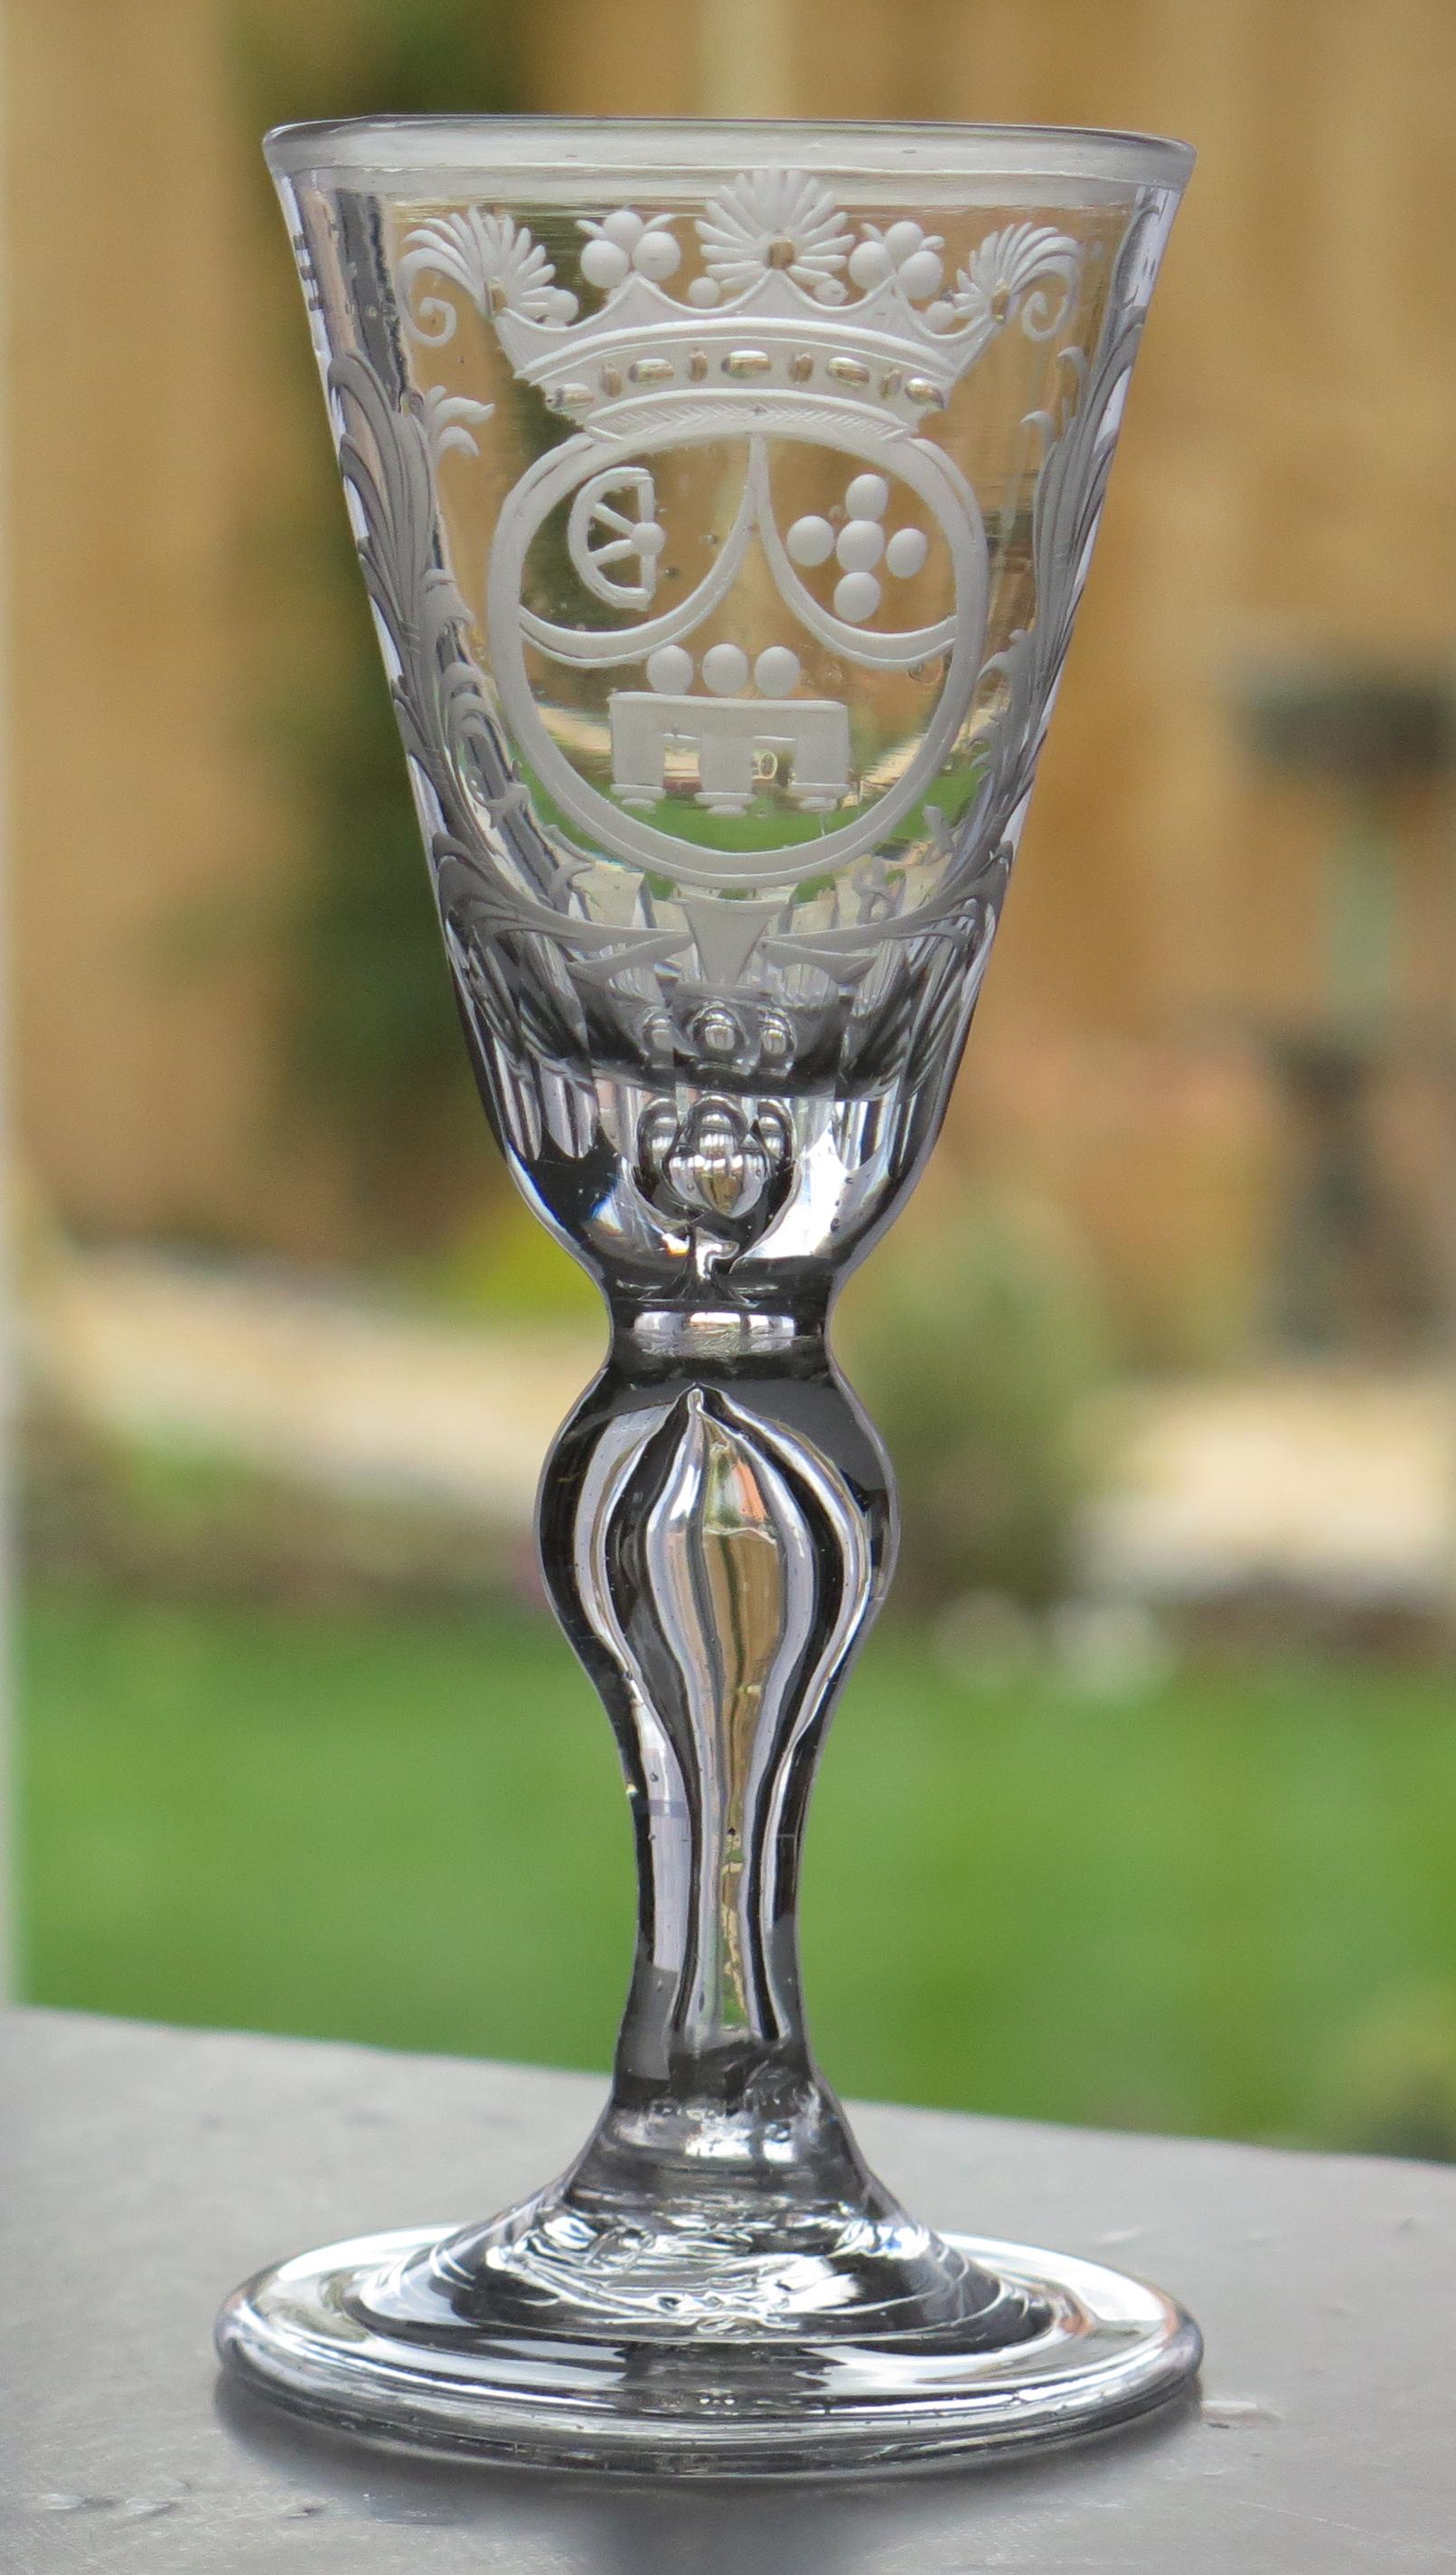 This is a very good, mid European, mid-18th century, handblown, wine drinking armorial glass; the bowl having an engraved crown coronet, circa 1740.

These glasses are very collectable.

This wine glass is hand-blown with a soft grey color. 

The